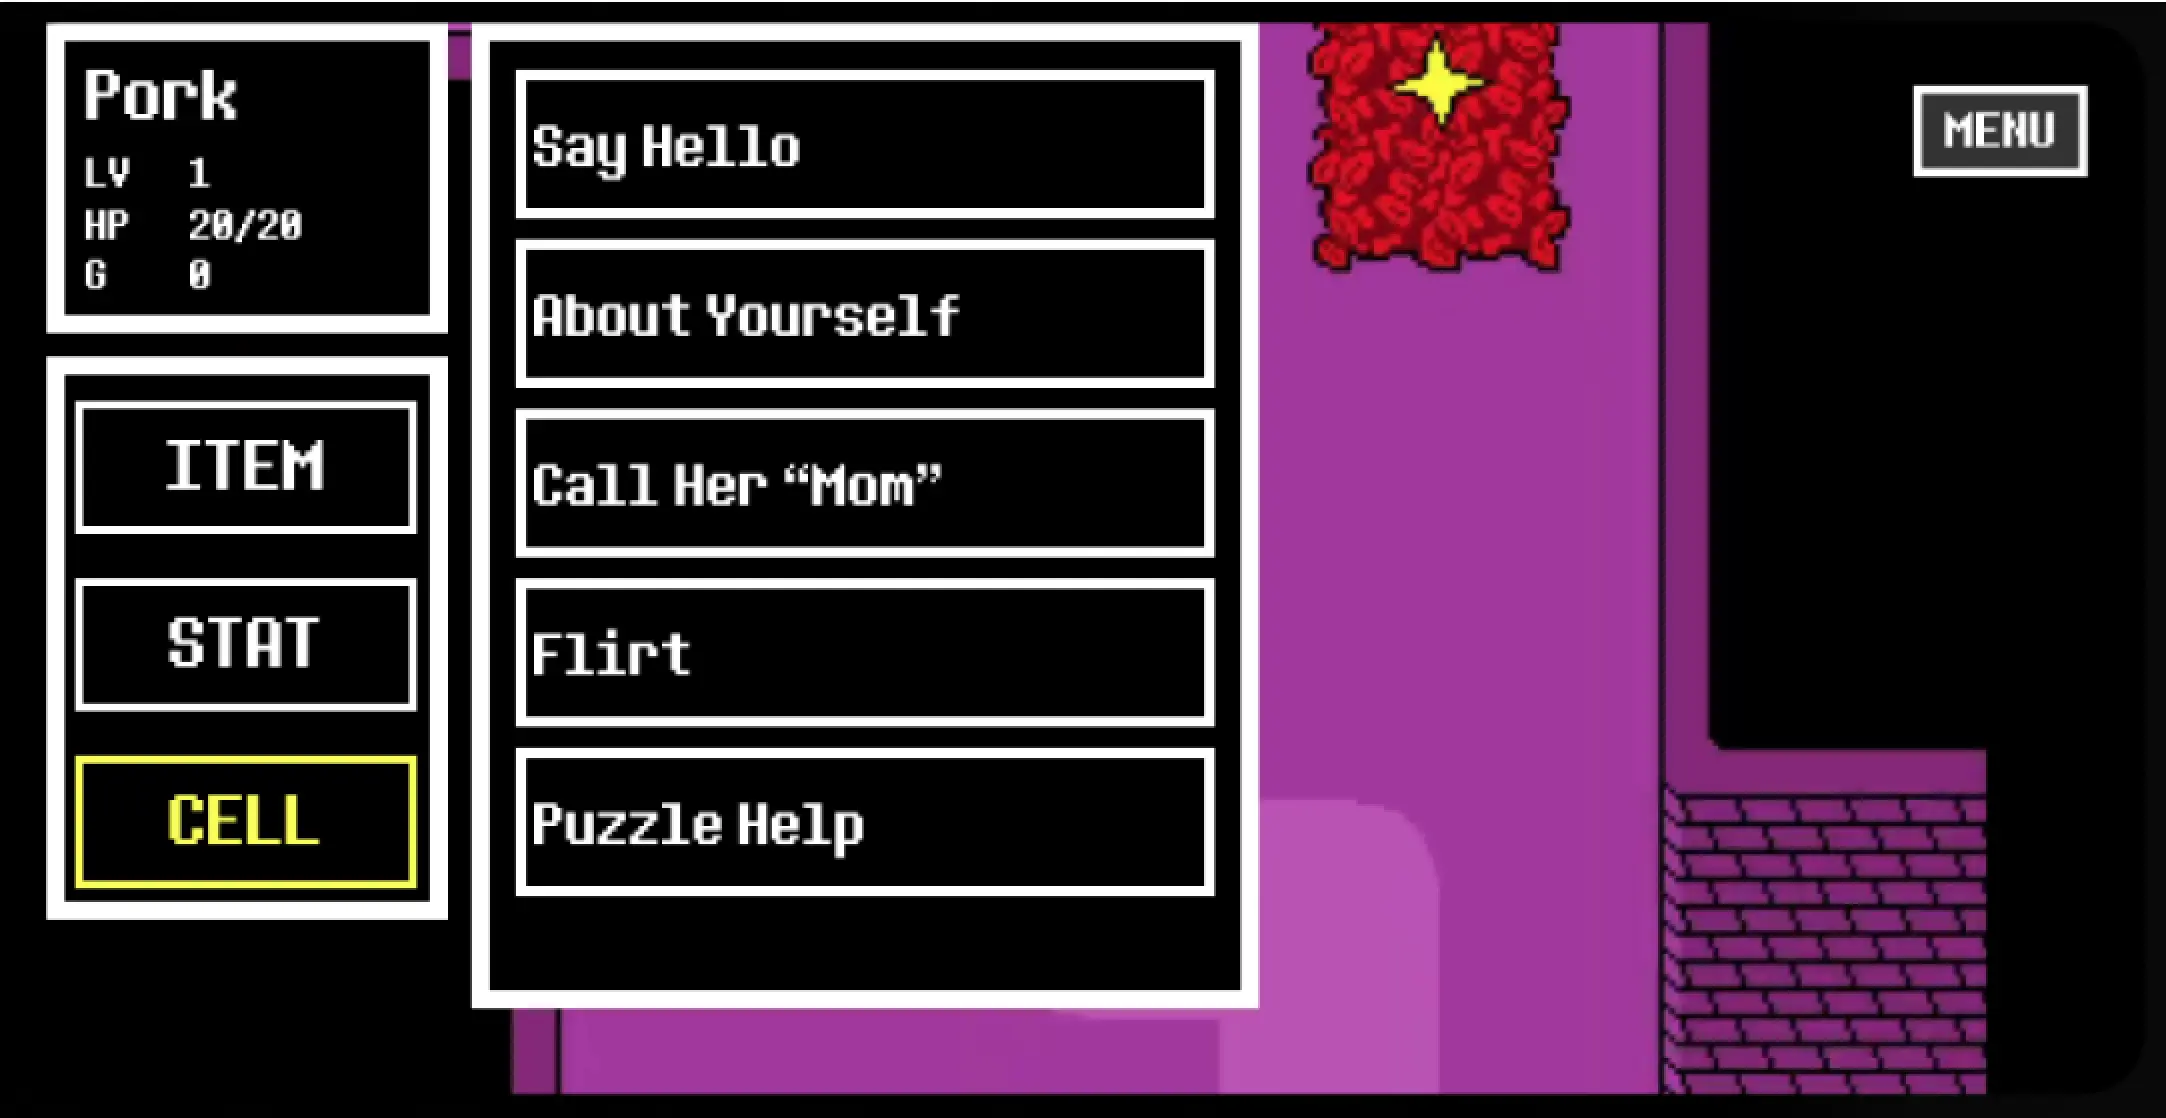 Undertale for Android Menu